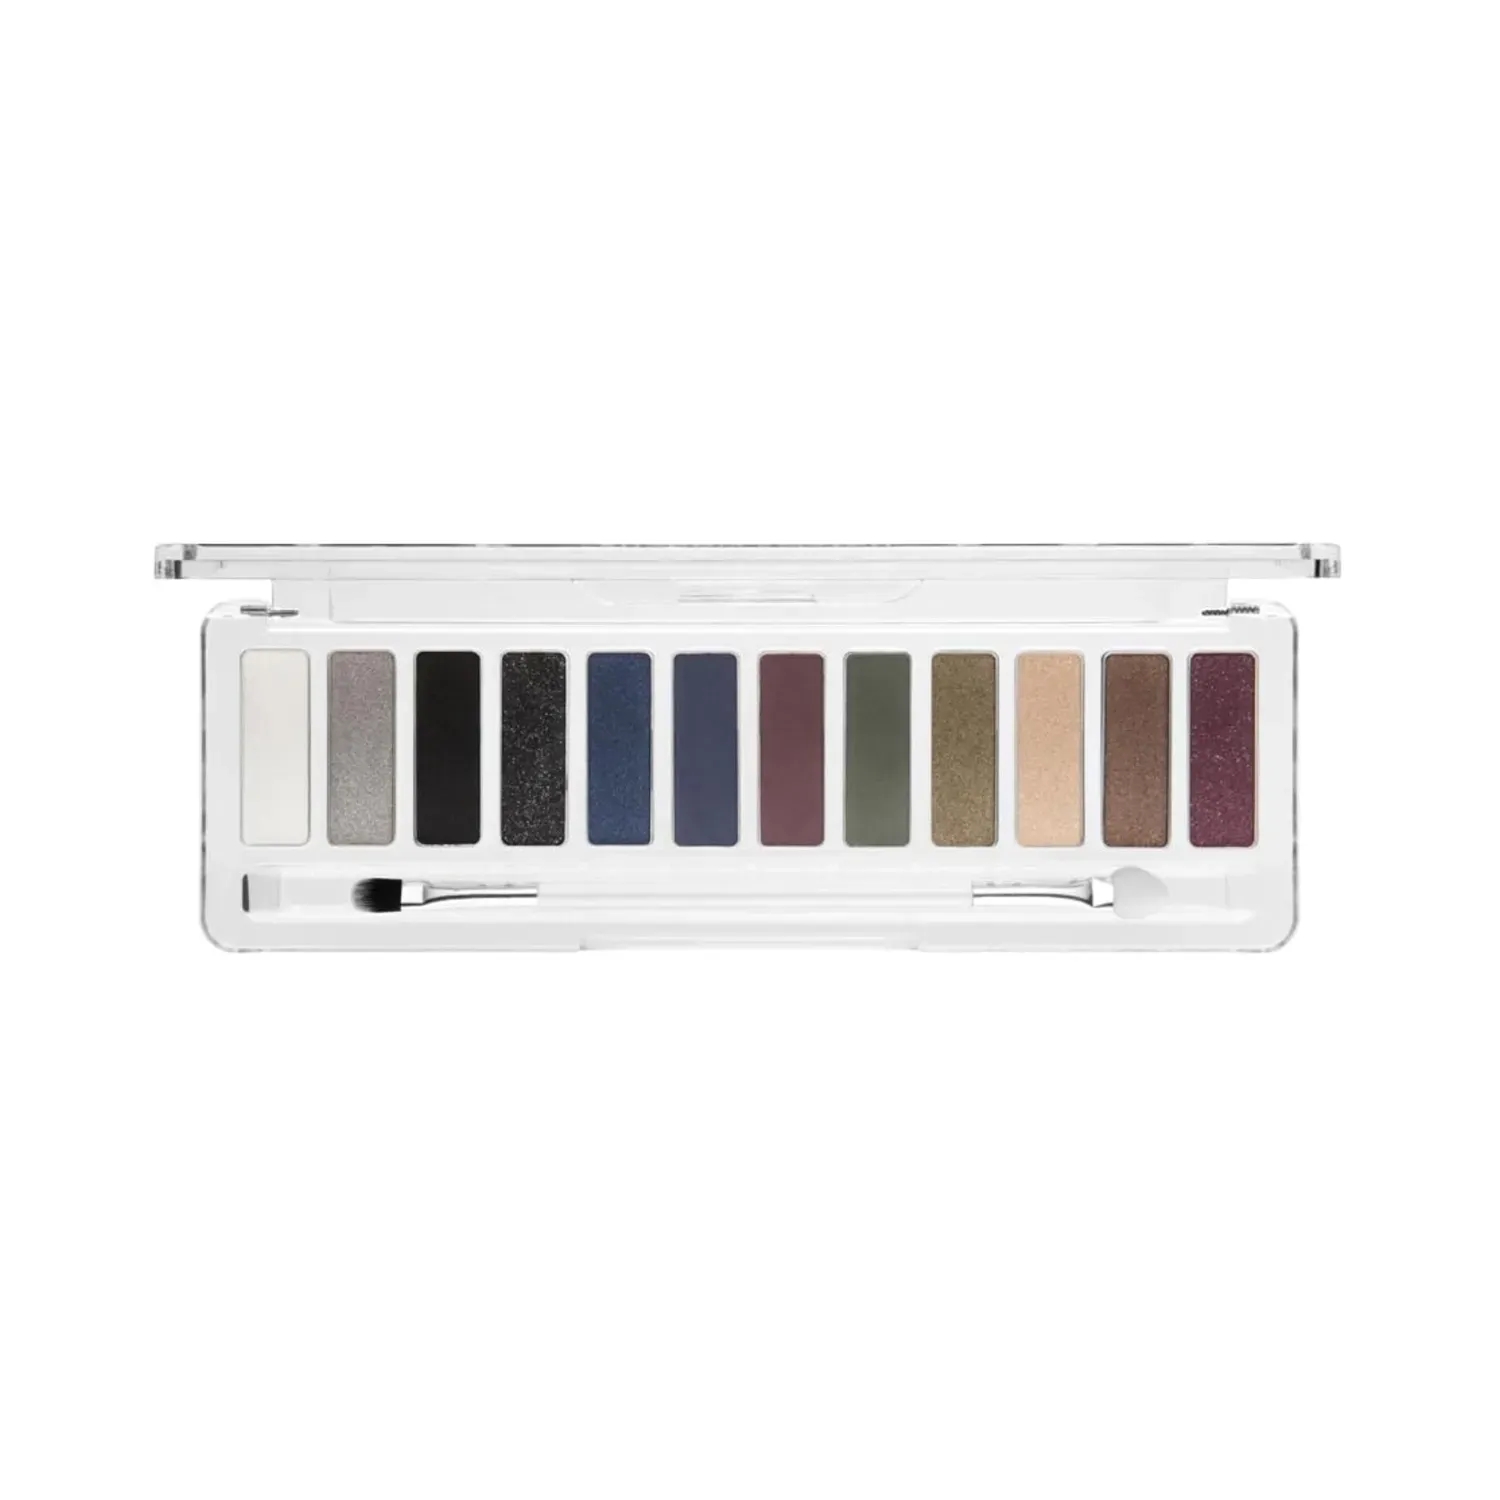 Lottie London Shadow Swatch Eyeshadow Palette With Brush - The Smokes (12g)